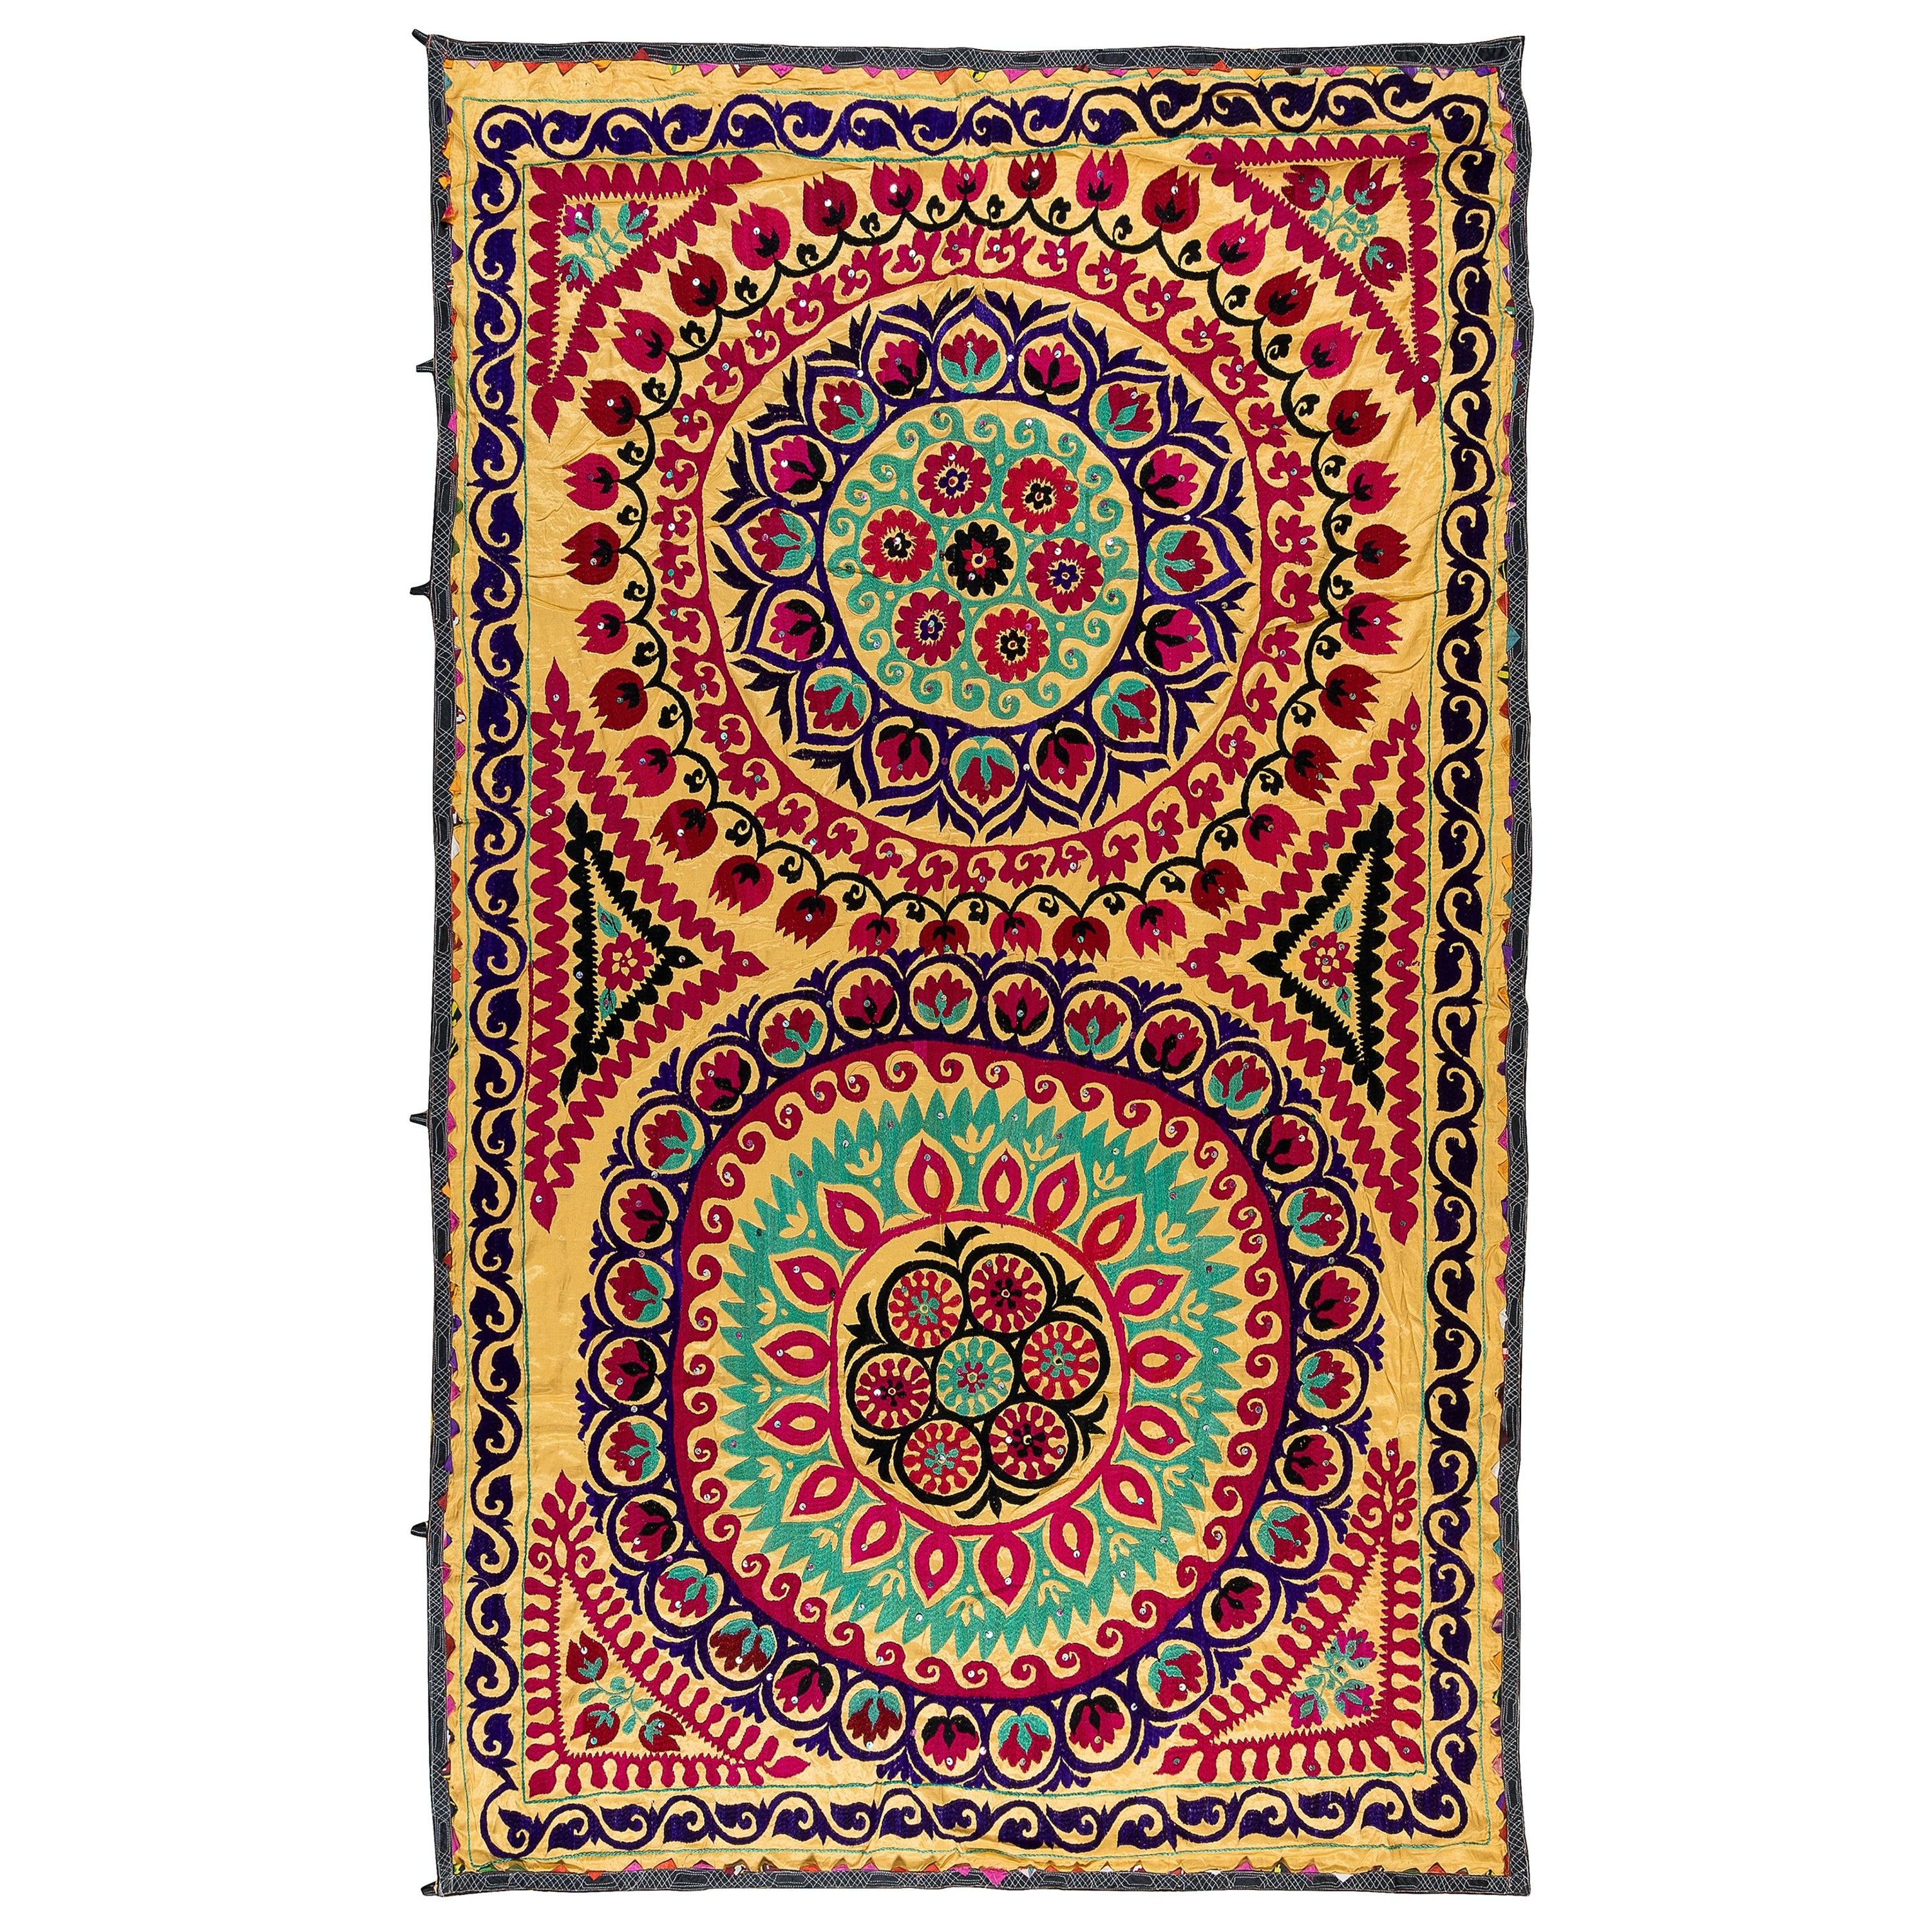 5x7.7 Ft Vintage Silk Embroidery Bed Cover, Uzbek Suzani Fabric Wall Hanging For Sale